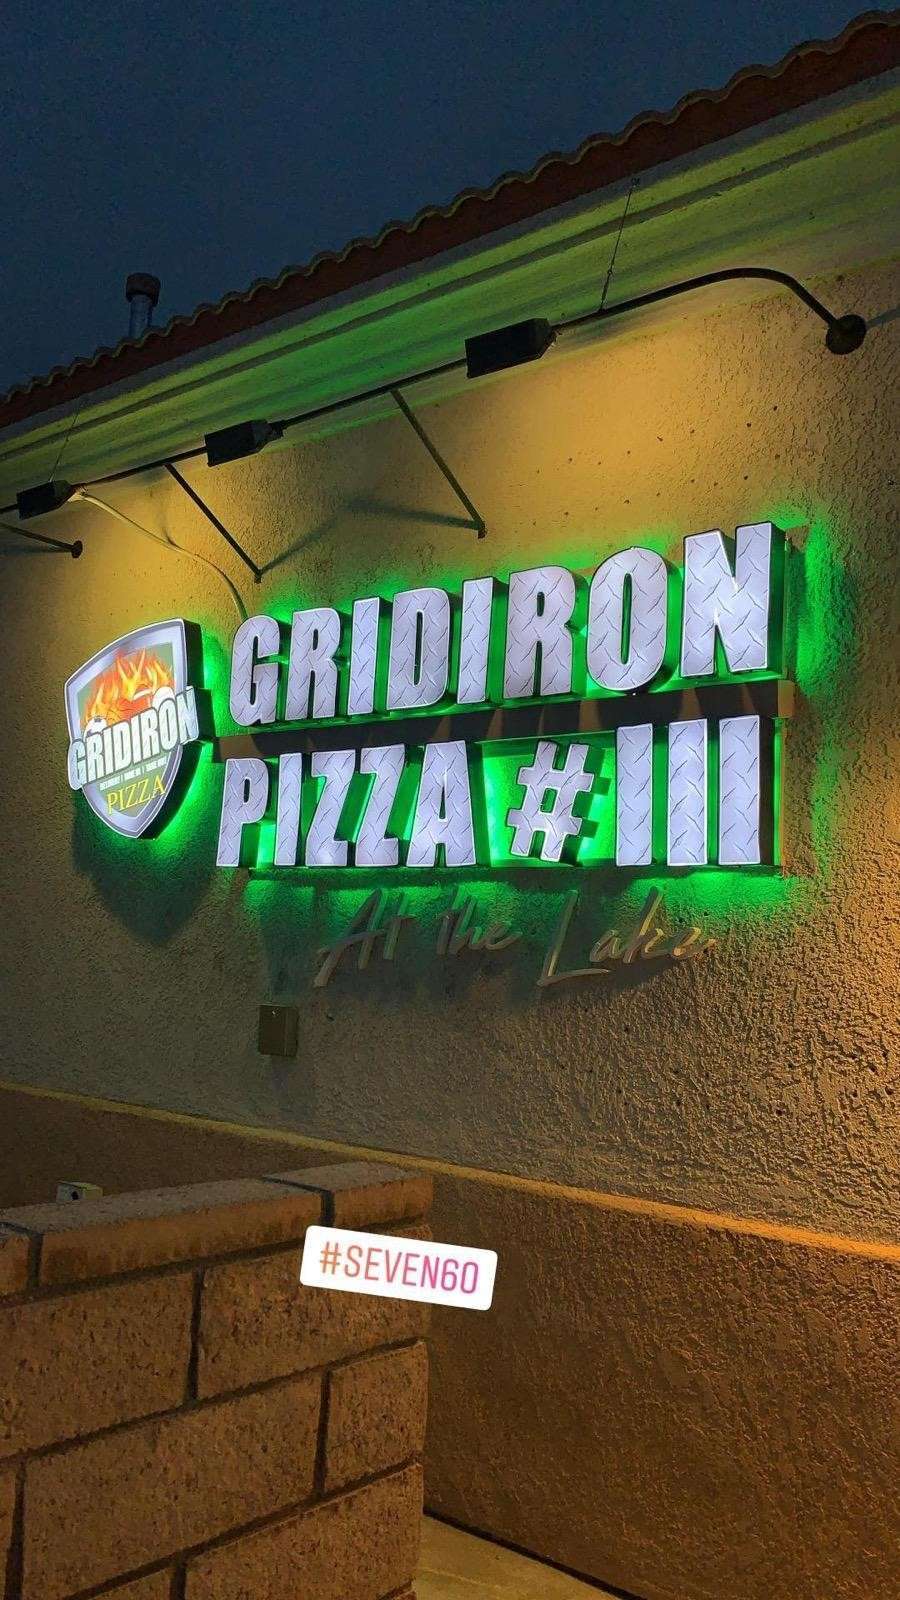 Gridiron Pizza #3 At The Lake | 27170 Lakeview Dr #402, Helendale, CA 92342, United States | Phone: (760) 243-0333